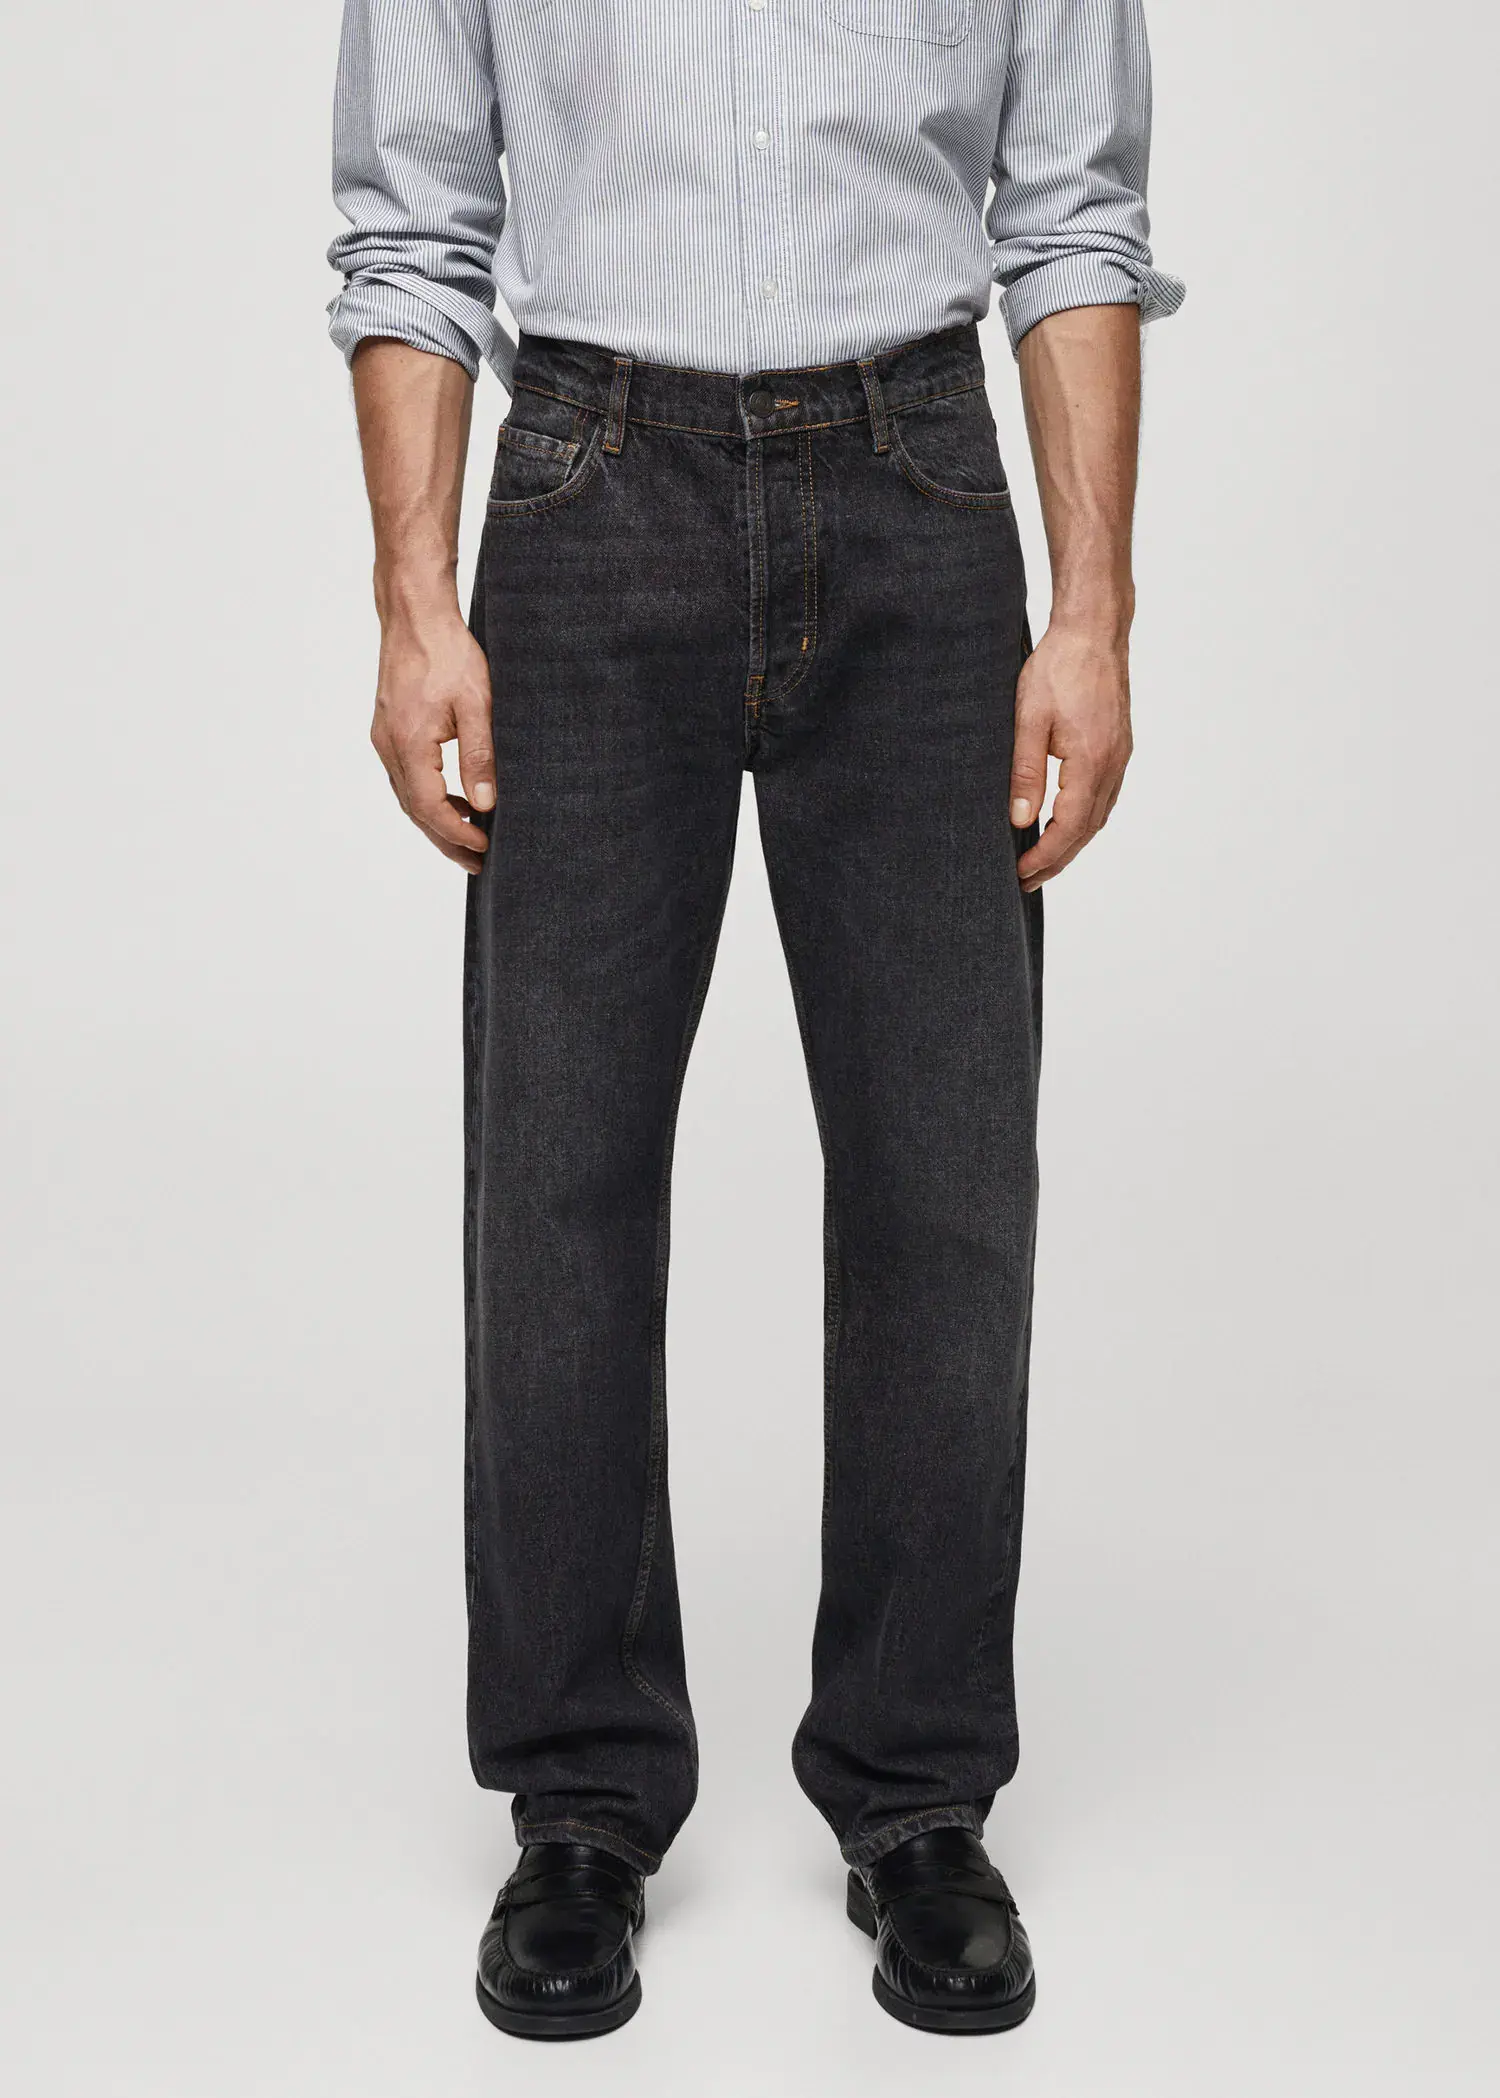 Mango Relaxed-fit dark wash jeans. 1